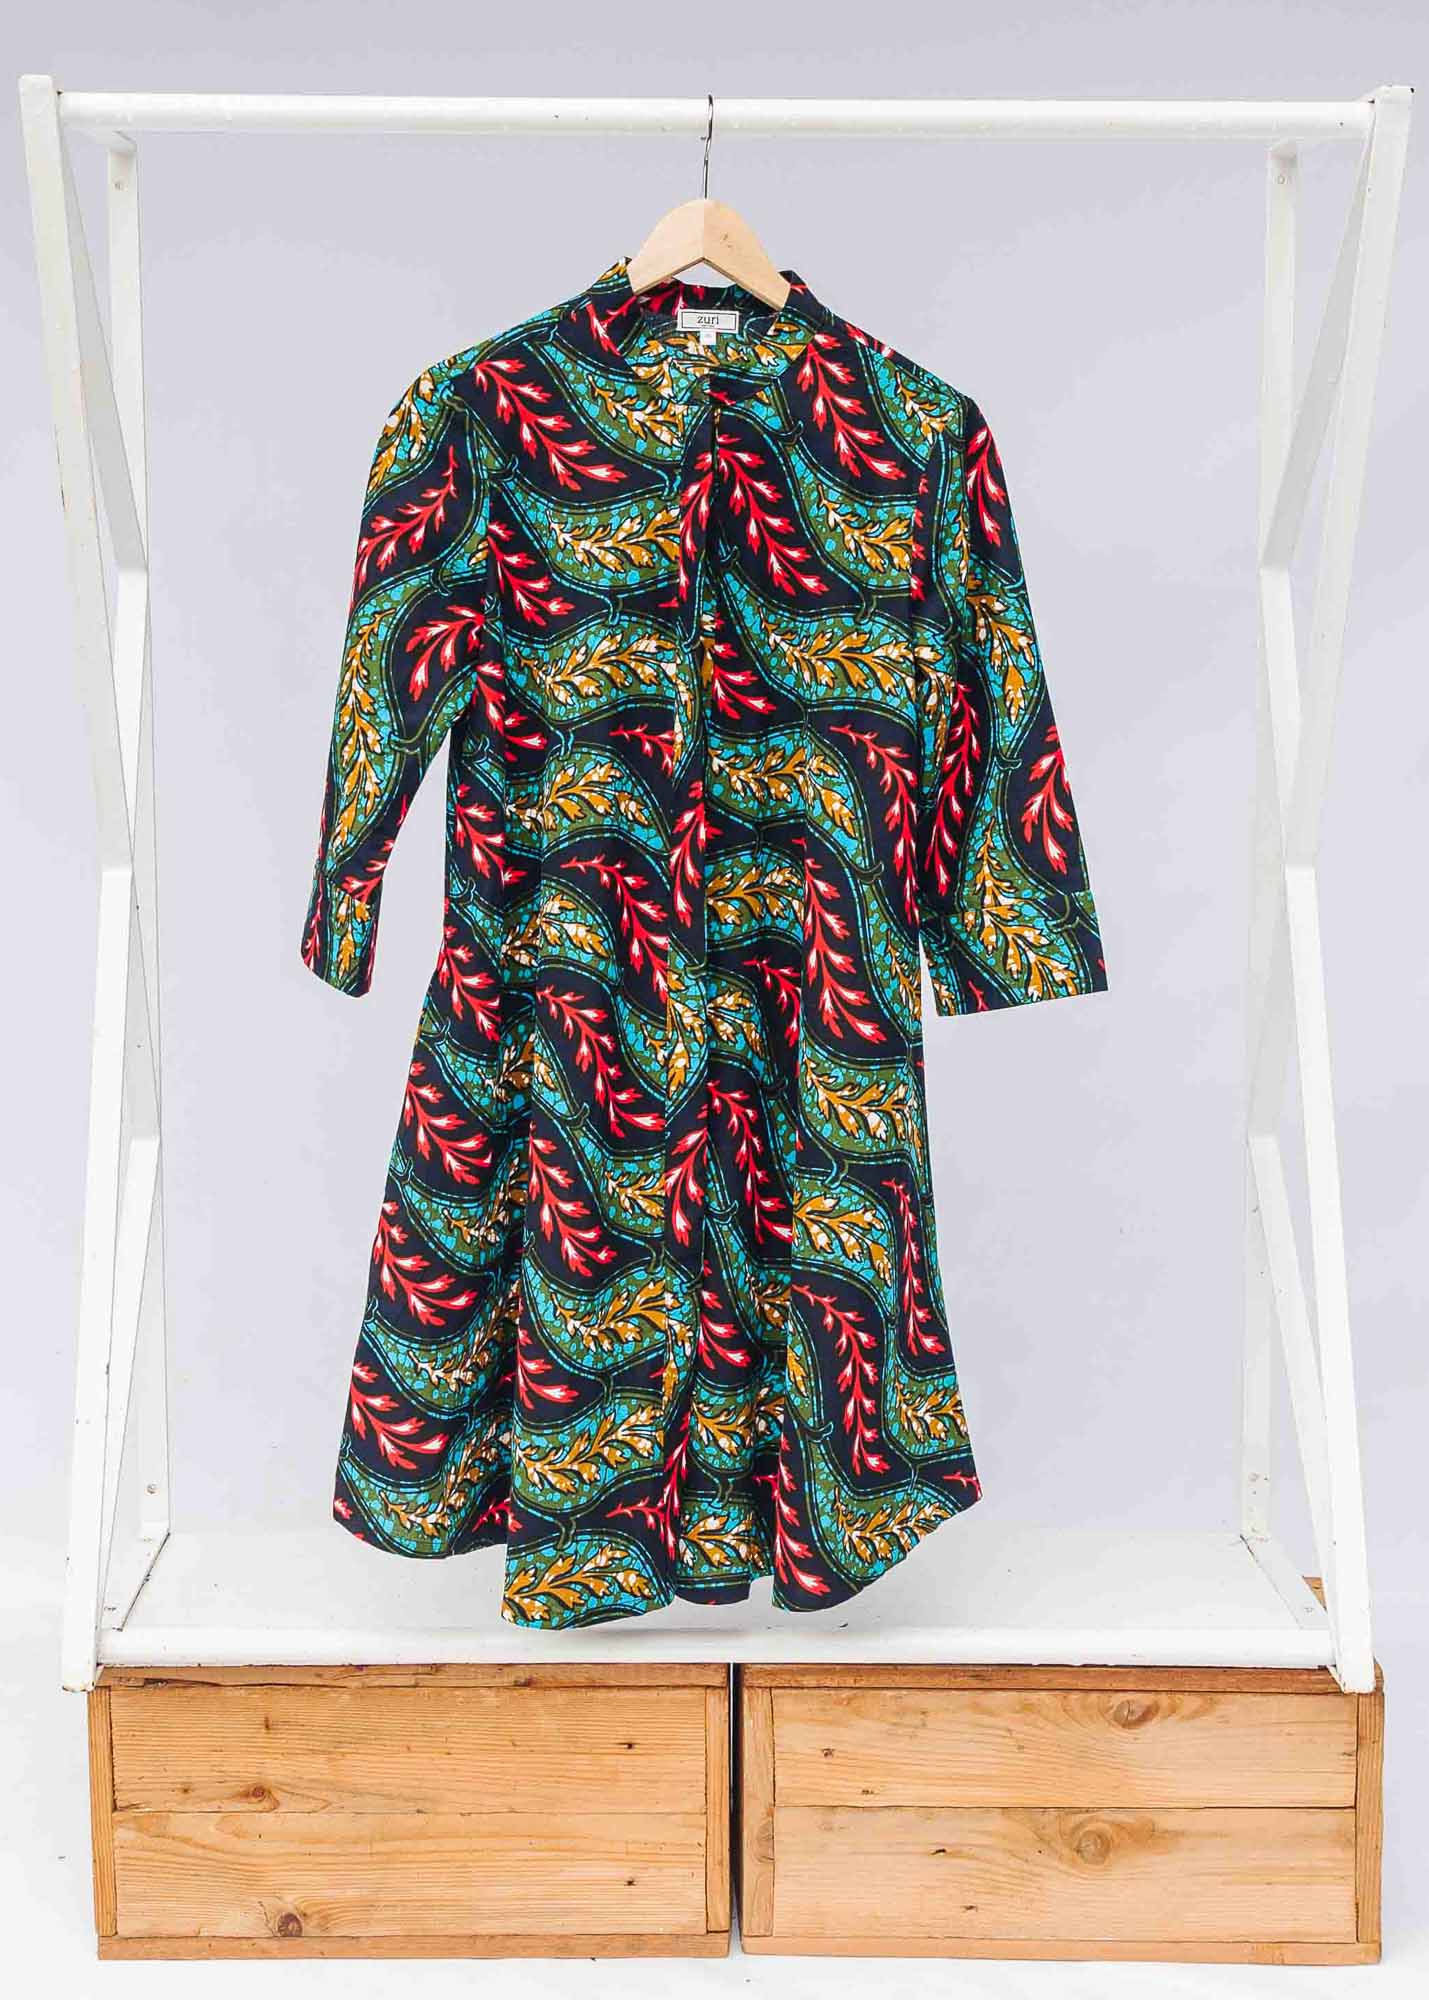 The display of  multicolored leaf print dress